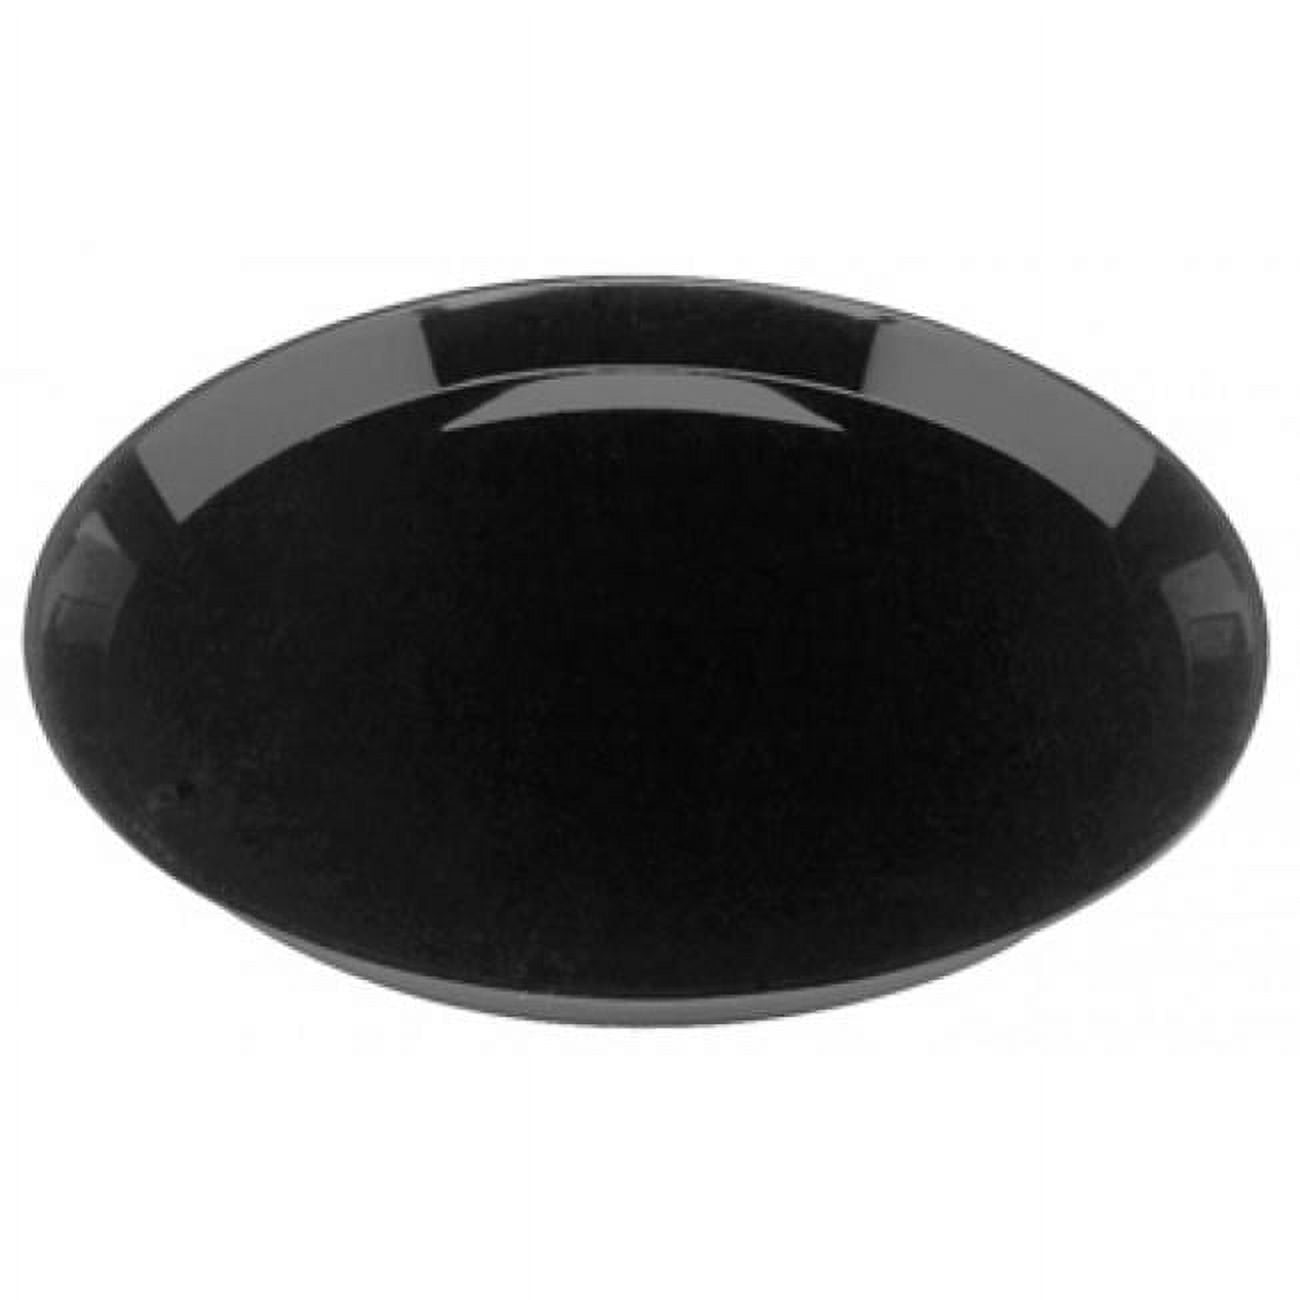 Stak16rb Cpc 16 In. Black Plastic Catering Tray - Case Of 25